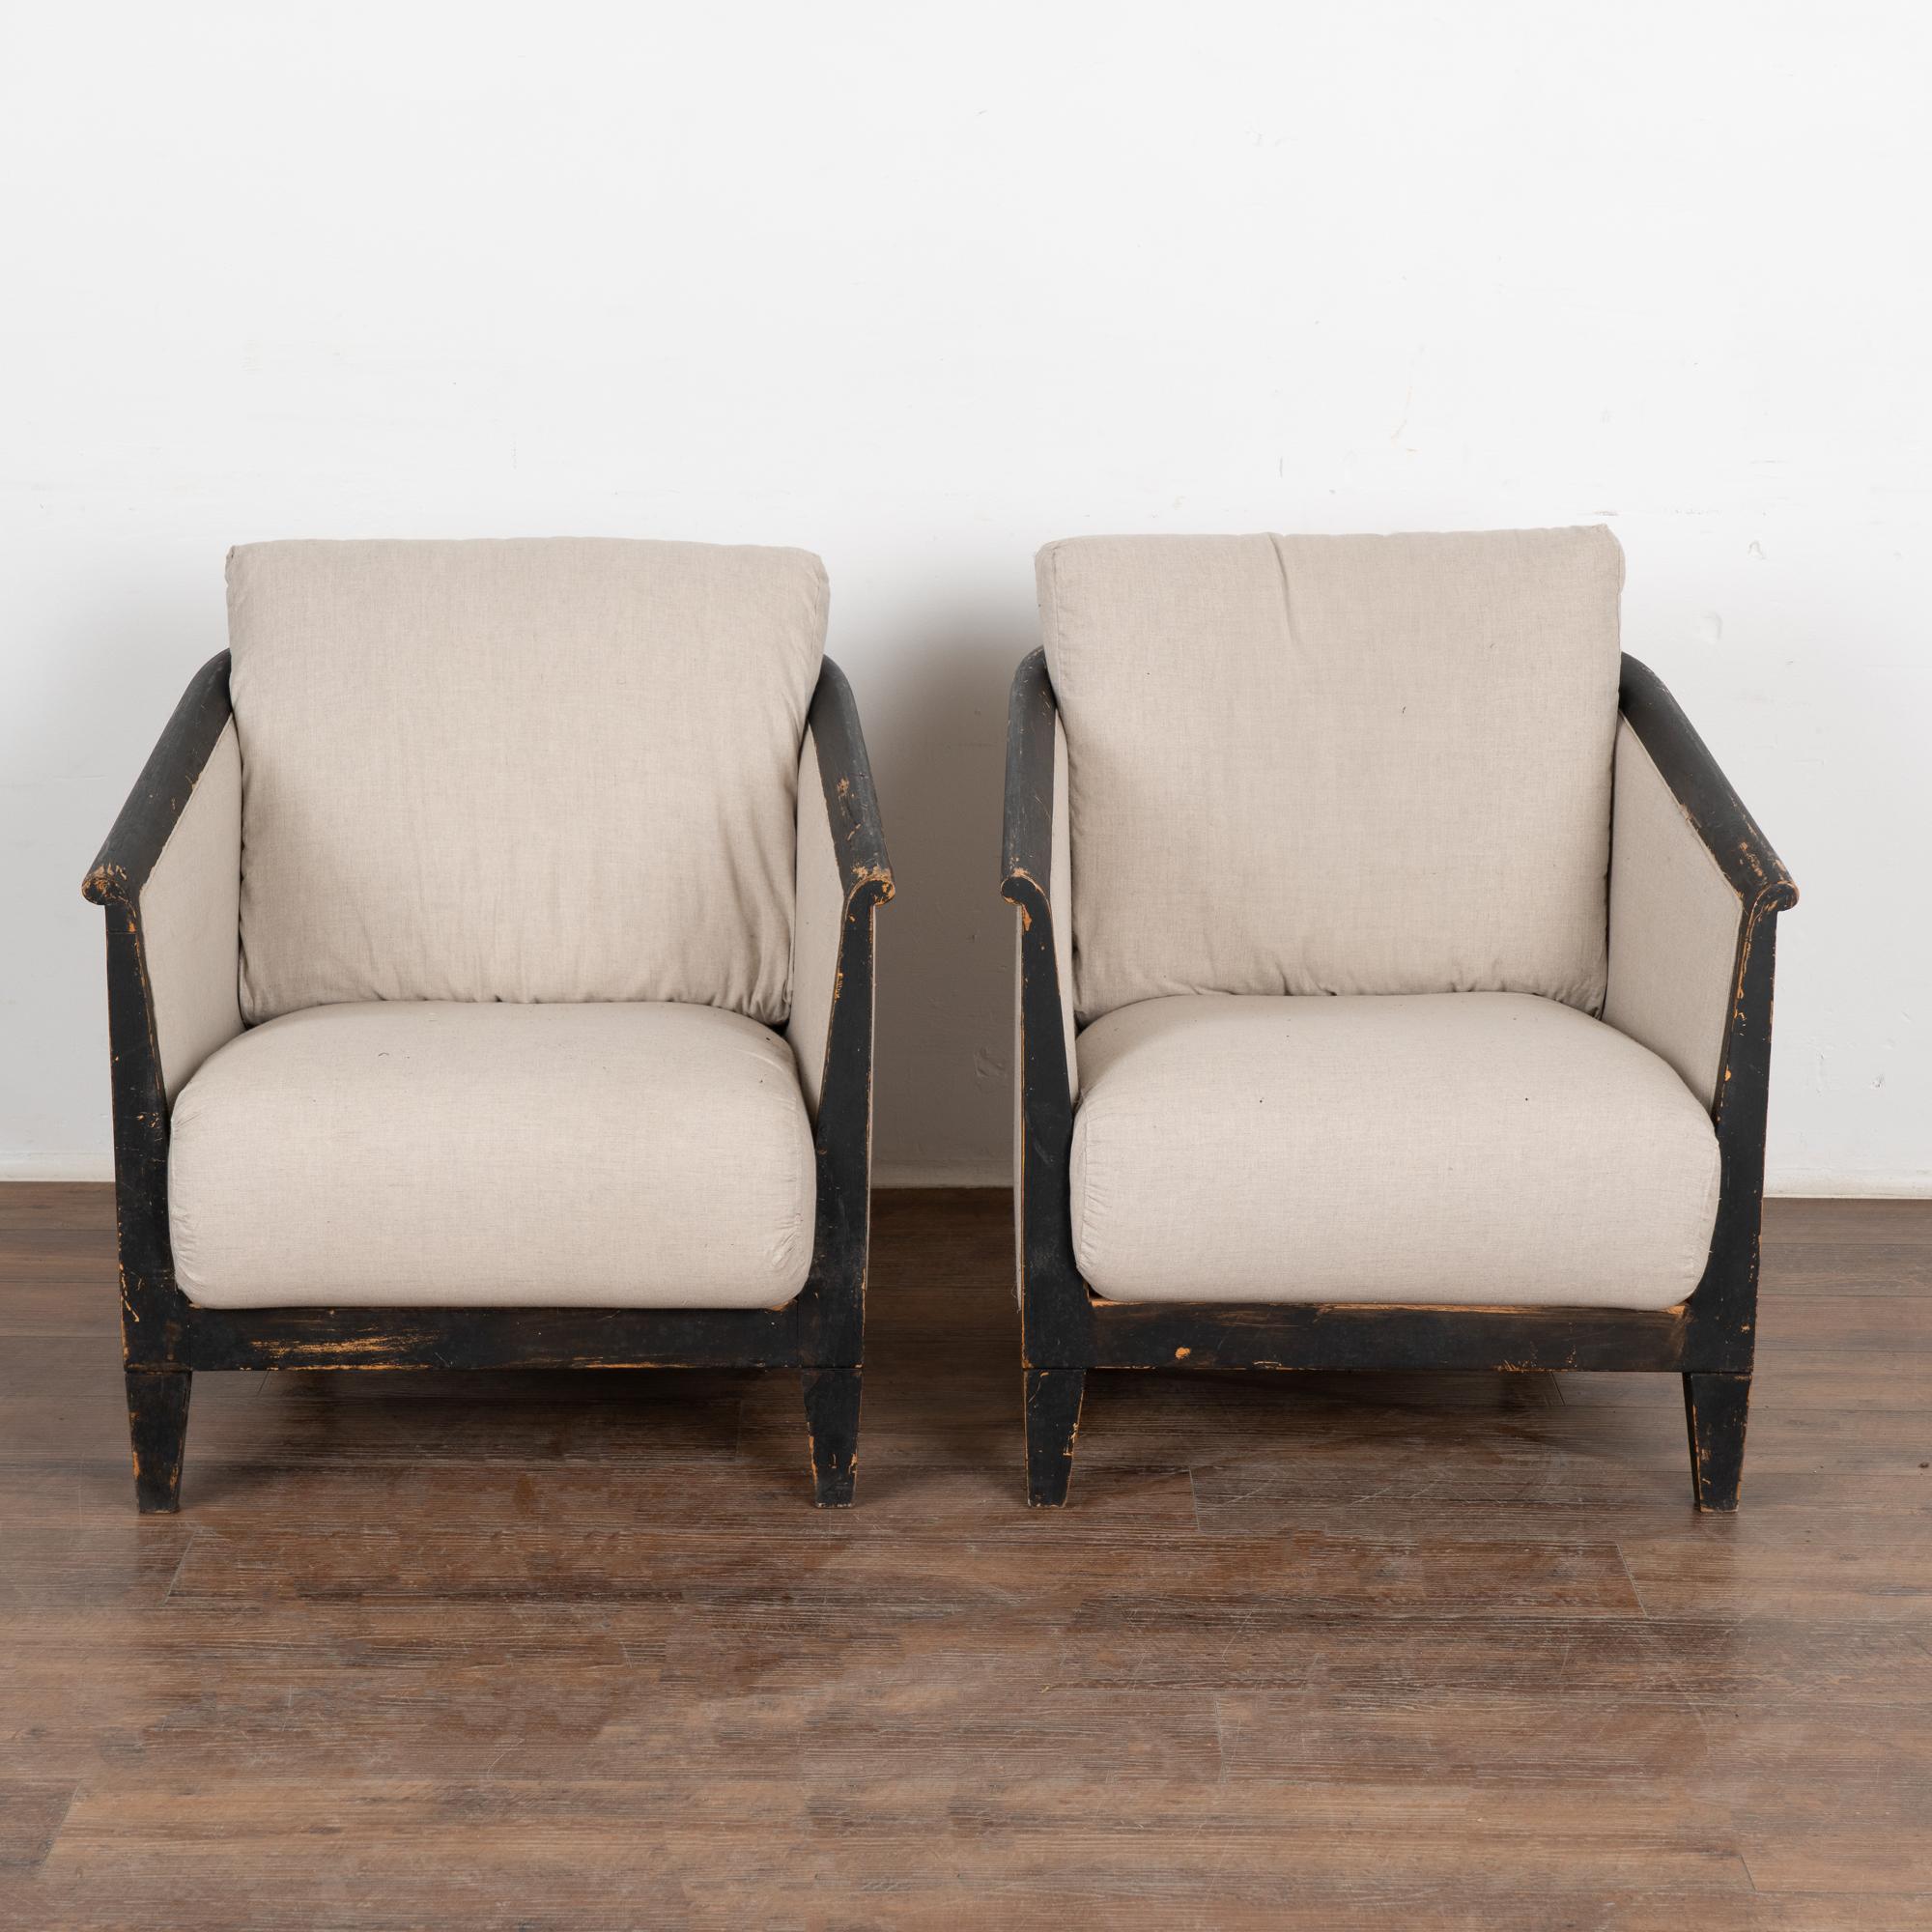 Swedish Pair, Black and Linen Arm Chairs, Sweden circa 1940's